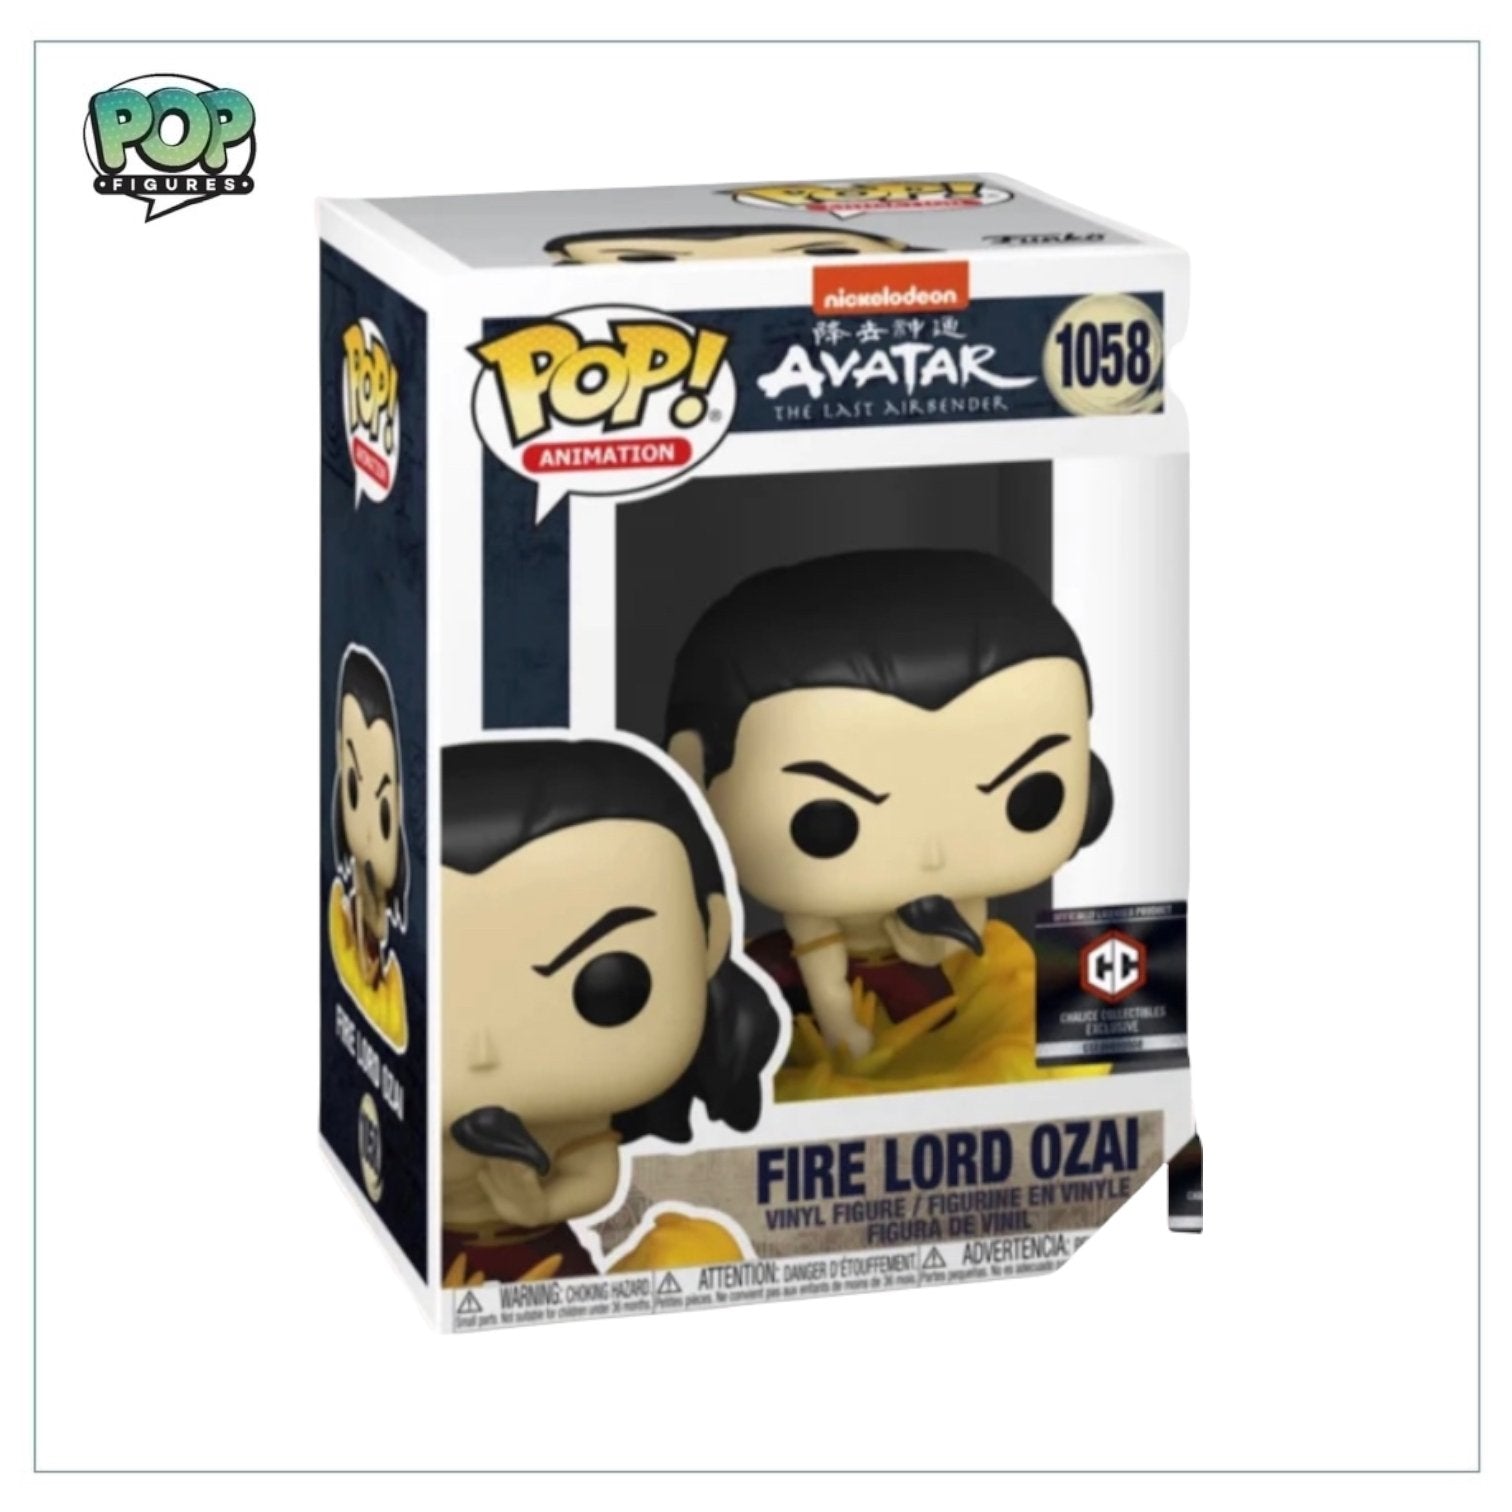 Fire Lord Ozai #1058 Funko Pop! Avatar: The Last Airbender - Chalice Collectibles Exclusive - PREORDER - Pop Figures | Funko | Pop Funko | Funko Pop